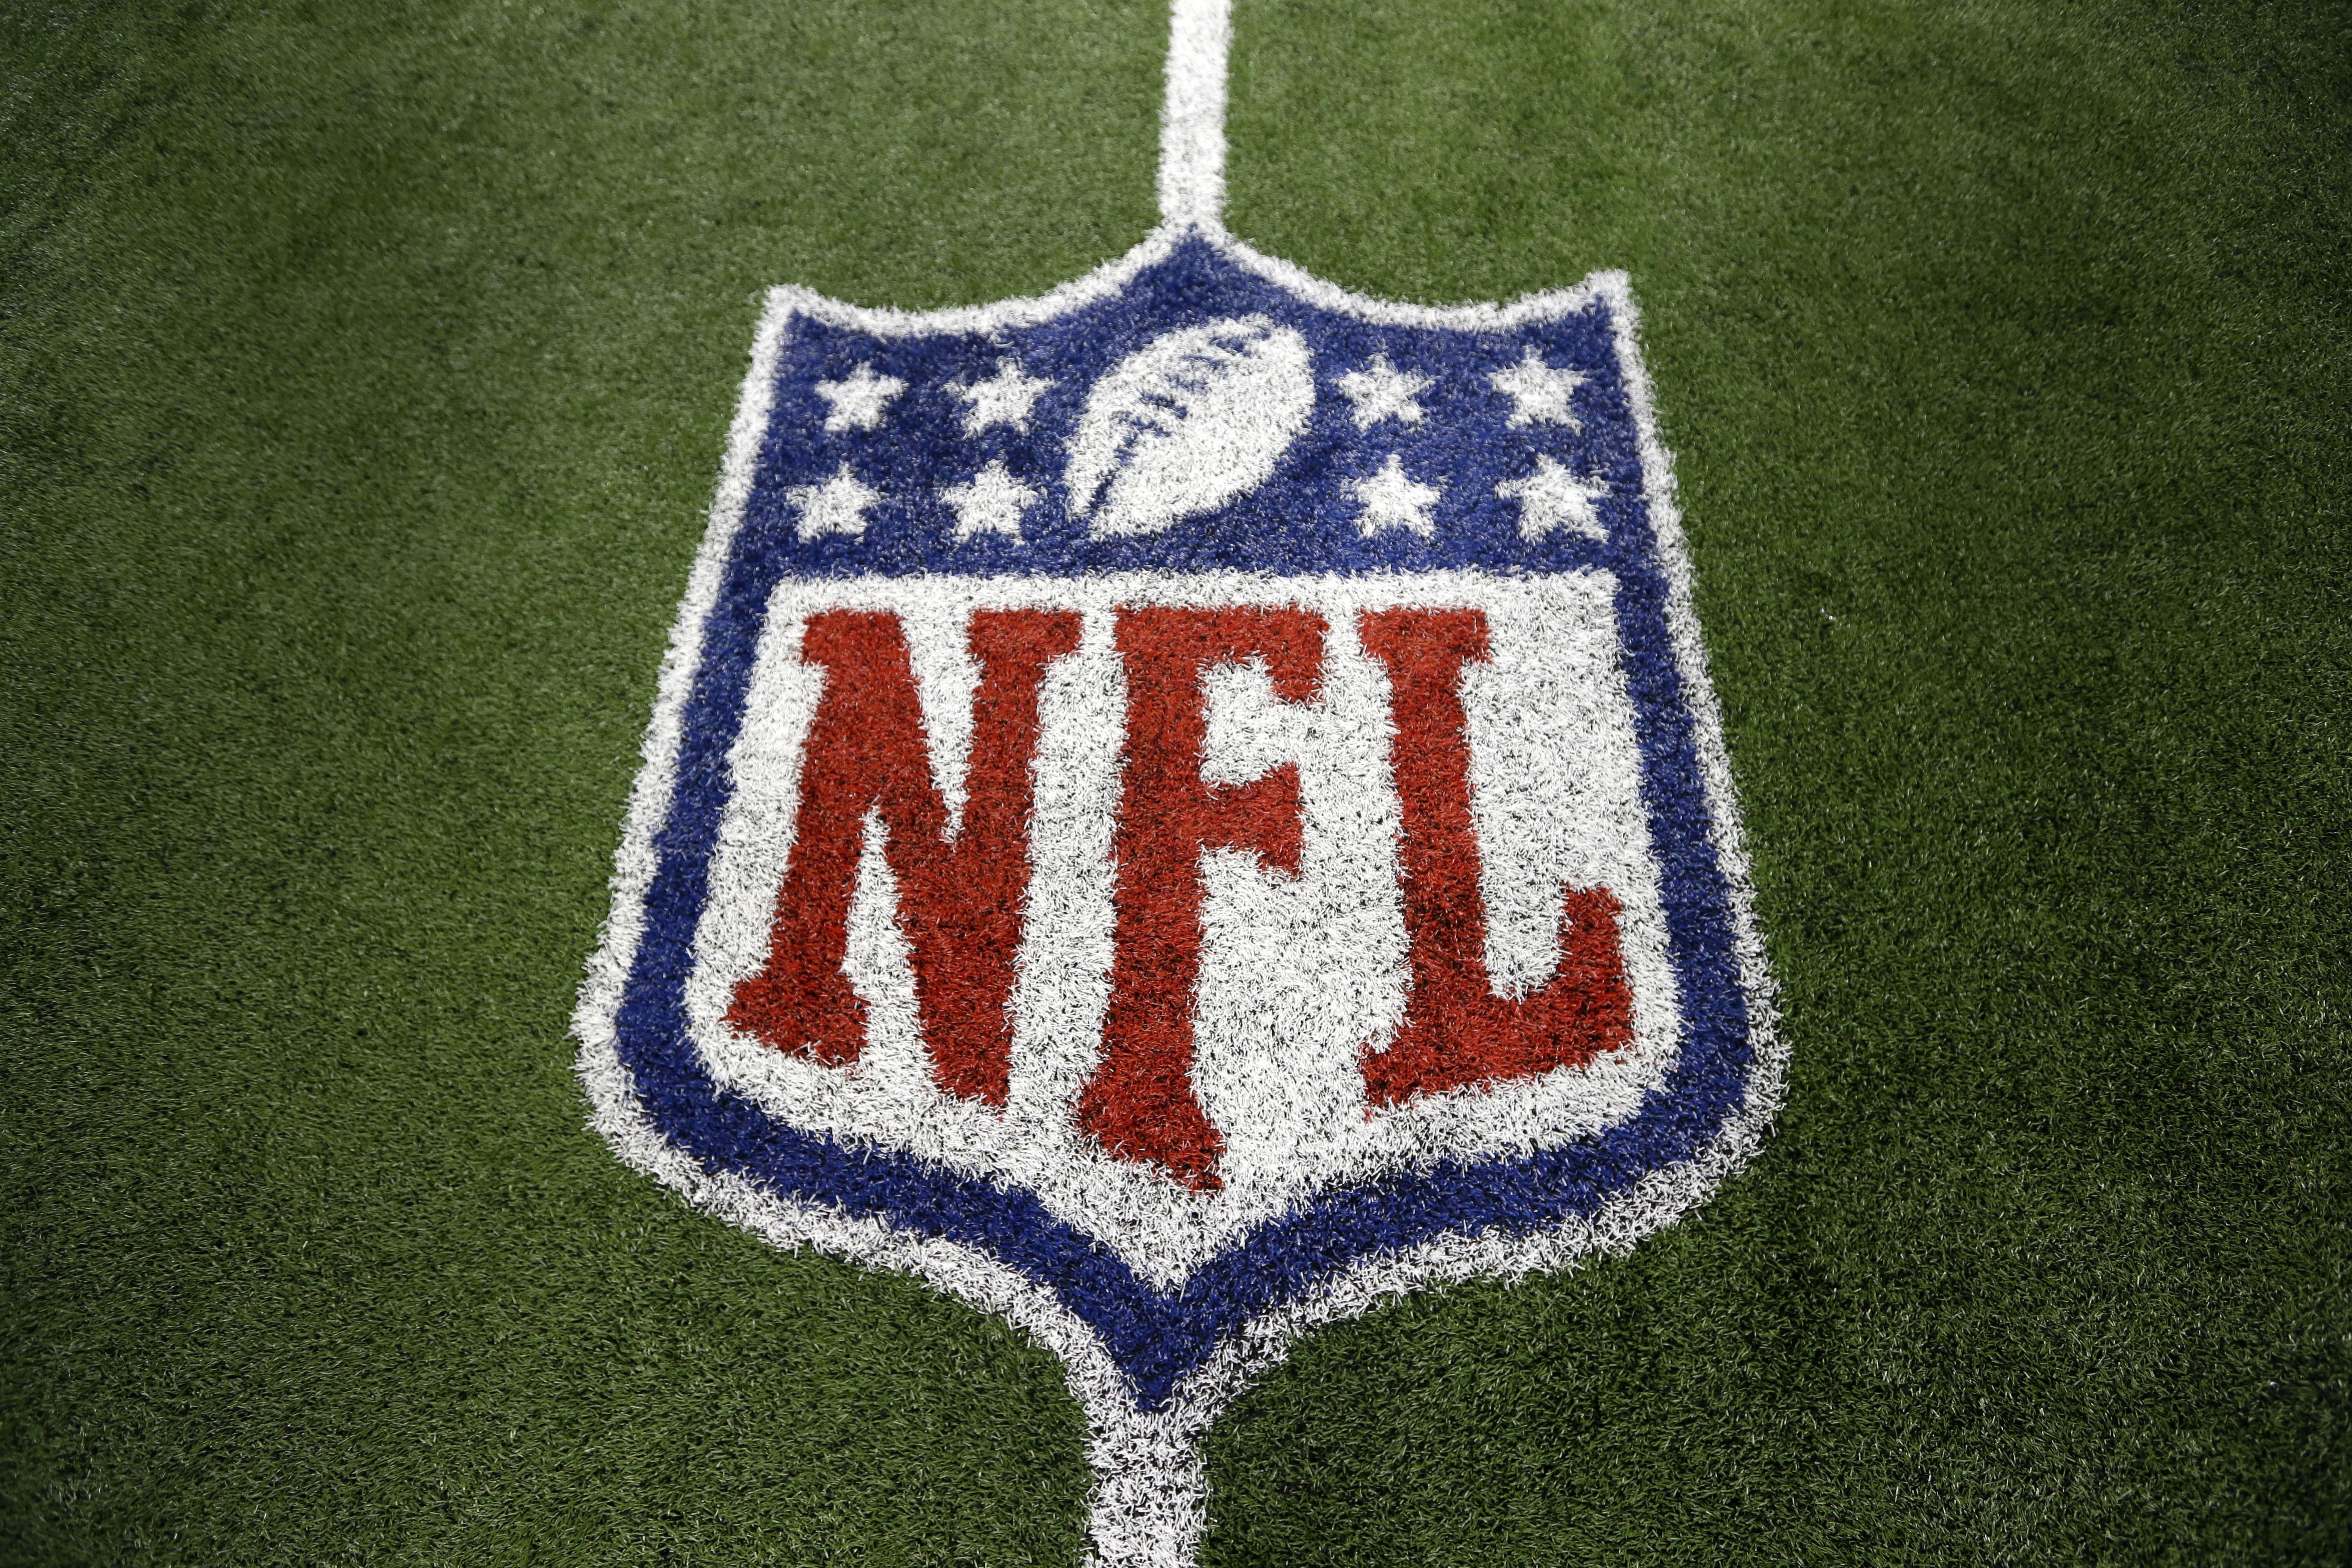 TV ready for its first season as the carrier of 'NFL